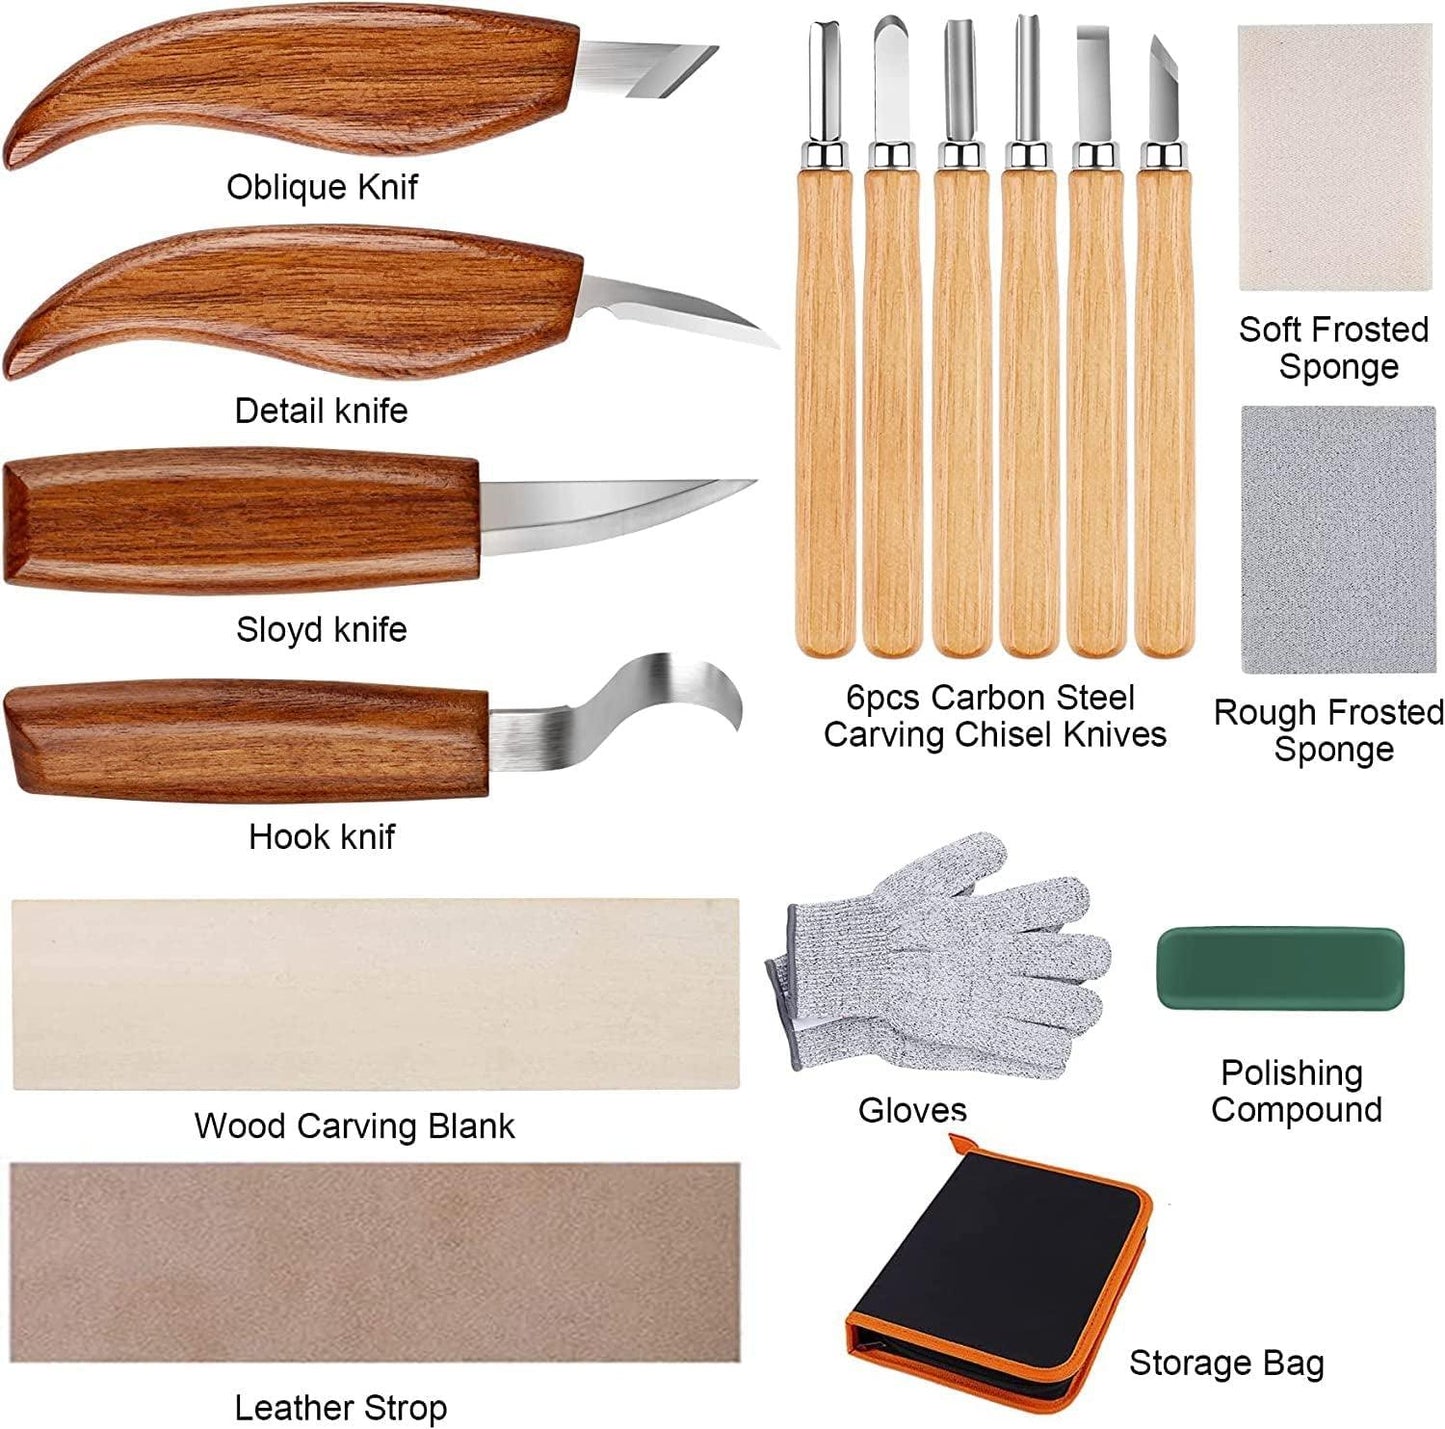 26-In-1 Wood Carving Kit with Detail Wood Carving Knife, Whittling Knife, Wood Chisel Knife, Gloves, Carving Kit - WoodArtSupply